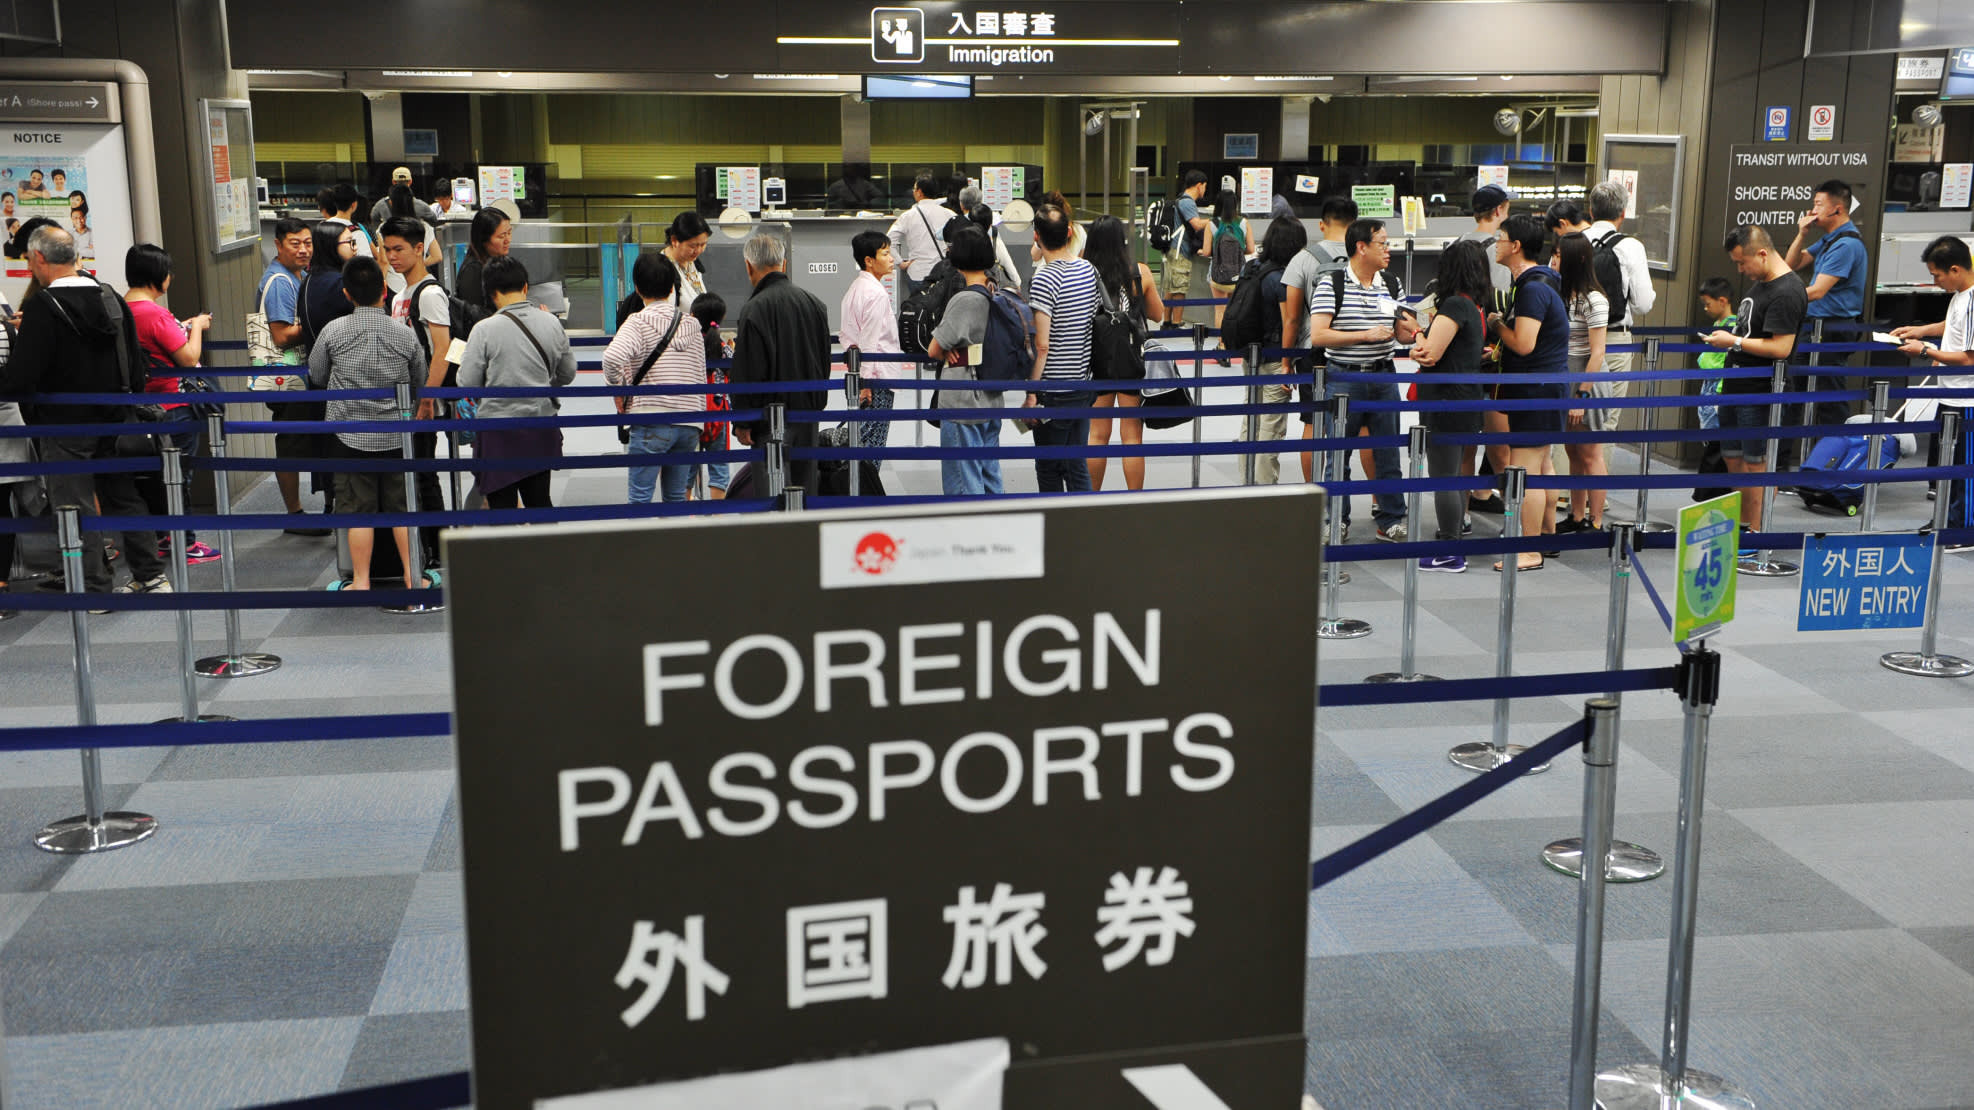 Japan plans to introduce a new electronic visa application system in time for the 2020 Olympic and Paralympic Games in Tokyo ©Getty Images